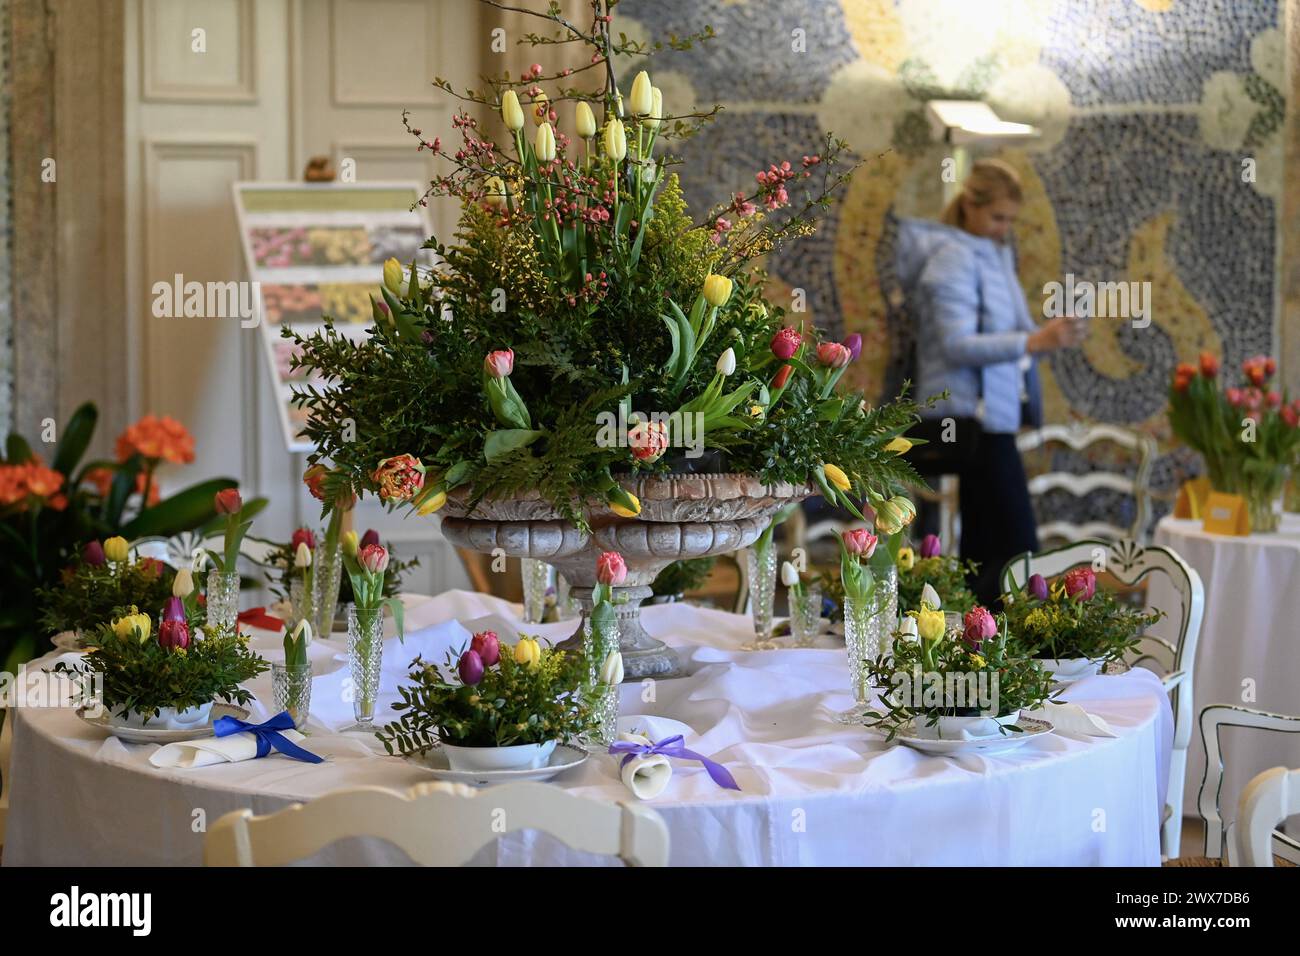 Buchlovice, Czech Republic. 28th Mar, 2024. Traditional exhibition of tulips called Tulipomania starts at the castle Buchlovice, Czech Republic, March 28, 2024. Flower arrangements at castle interiors. Credit: Dalibor Gluck/CTK Photo/Alamy Live News Stock Photo